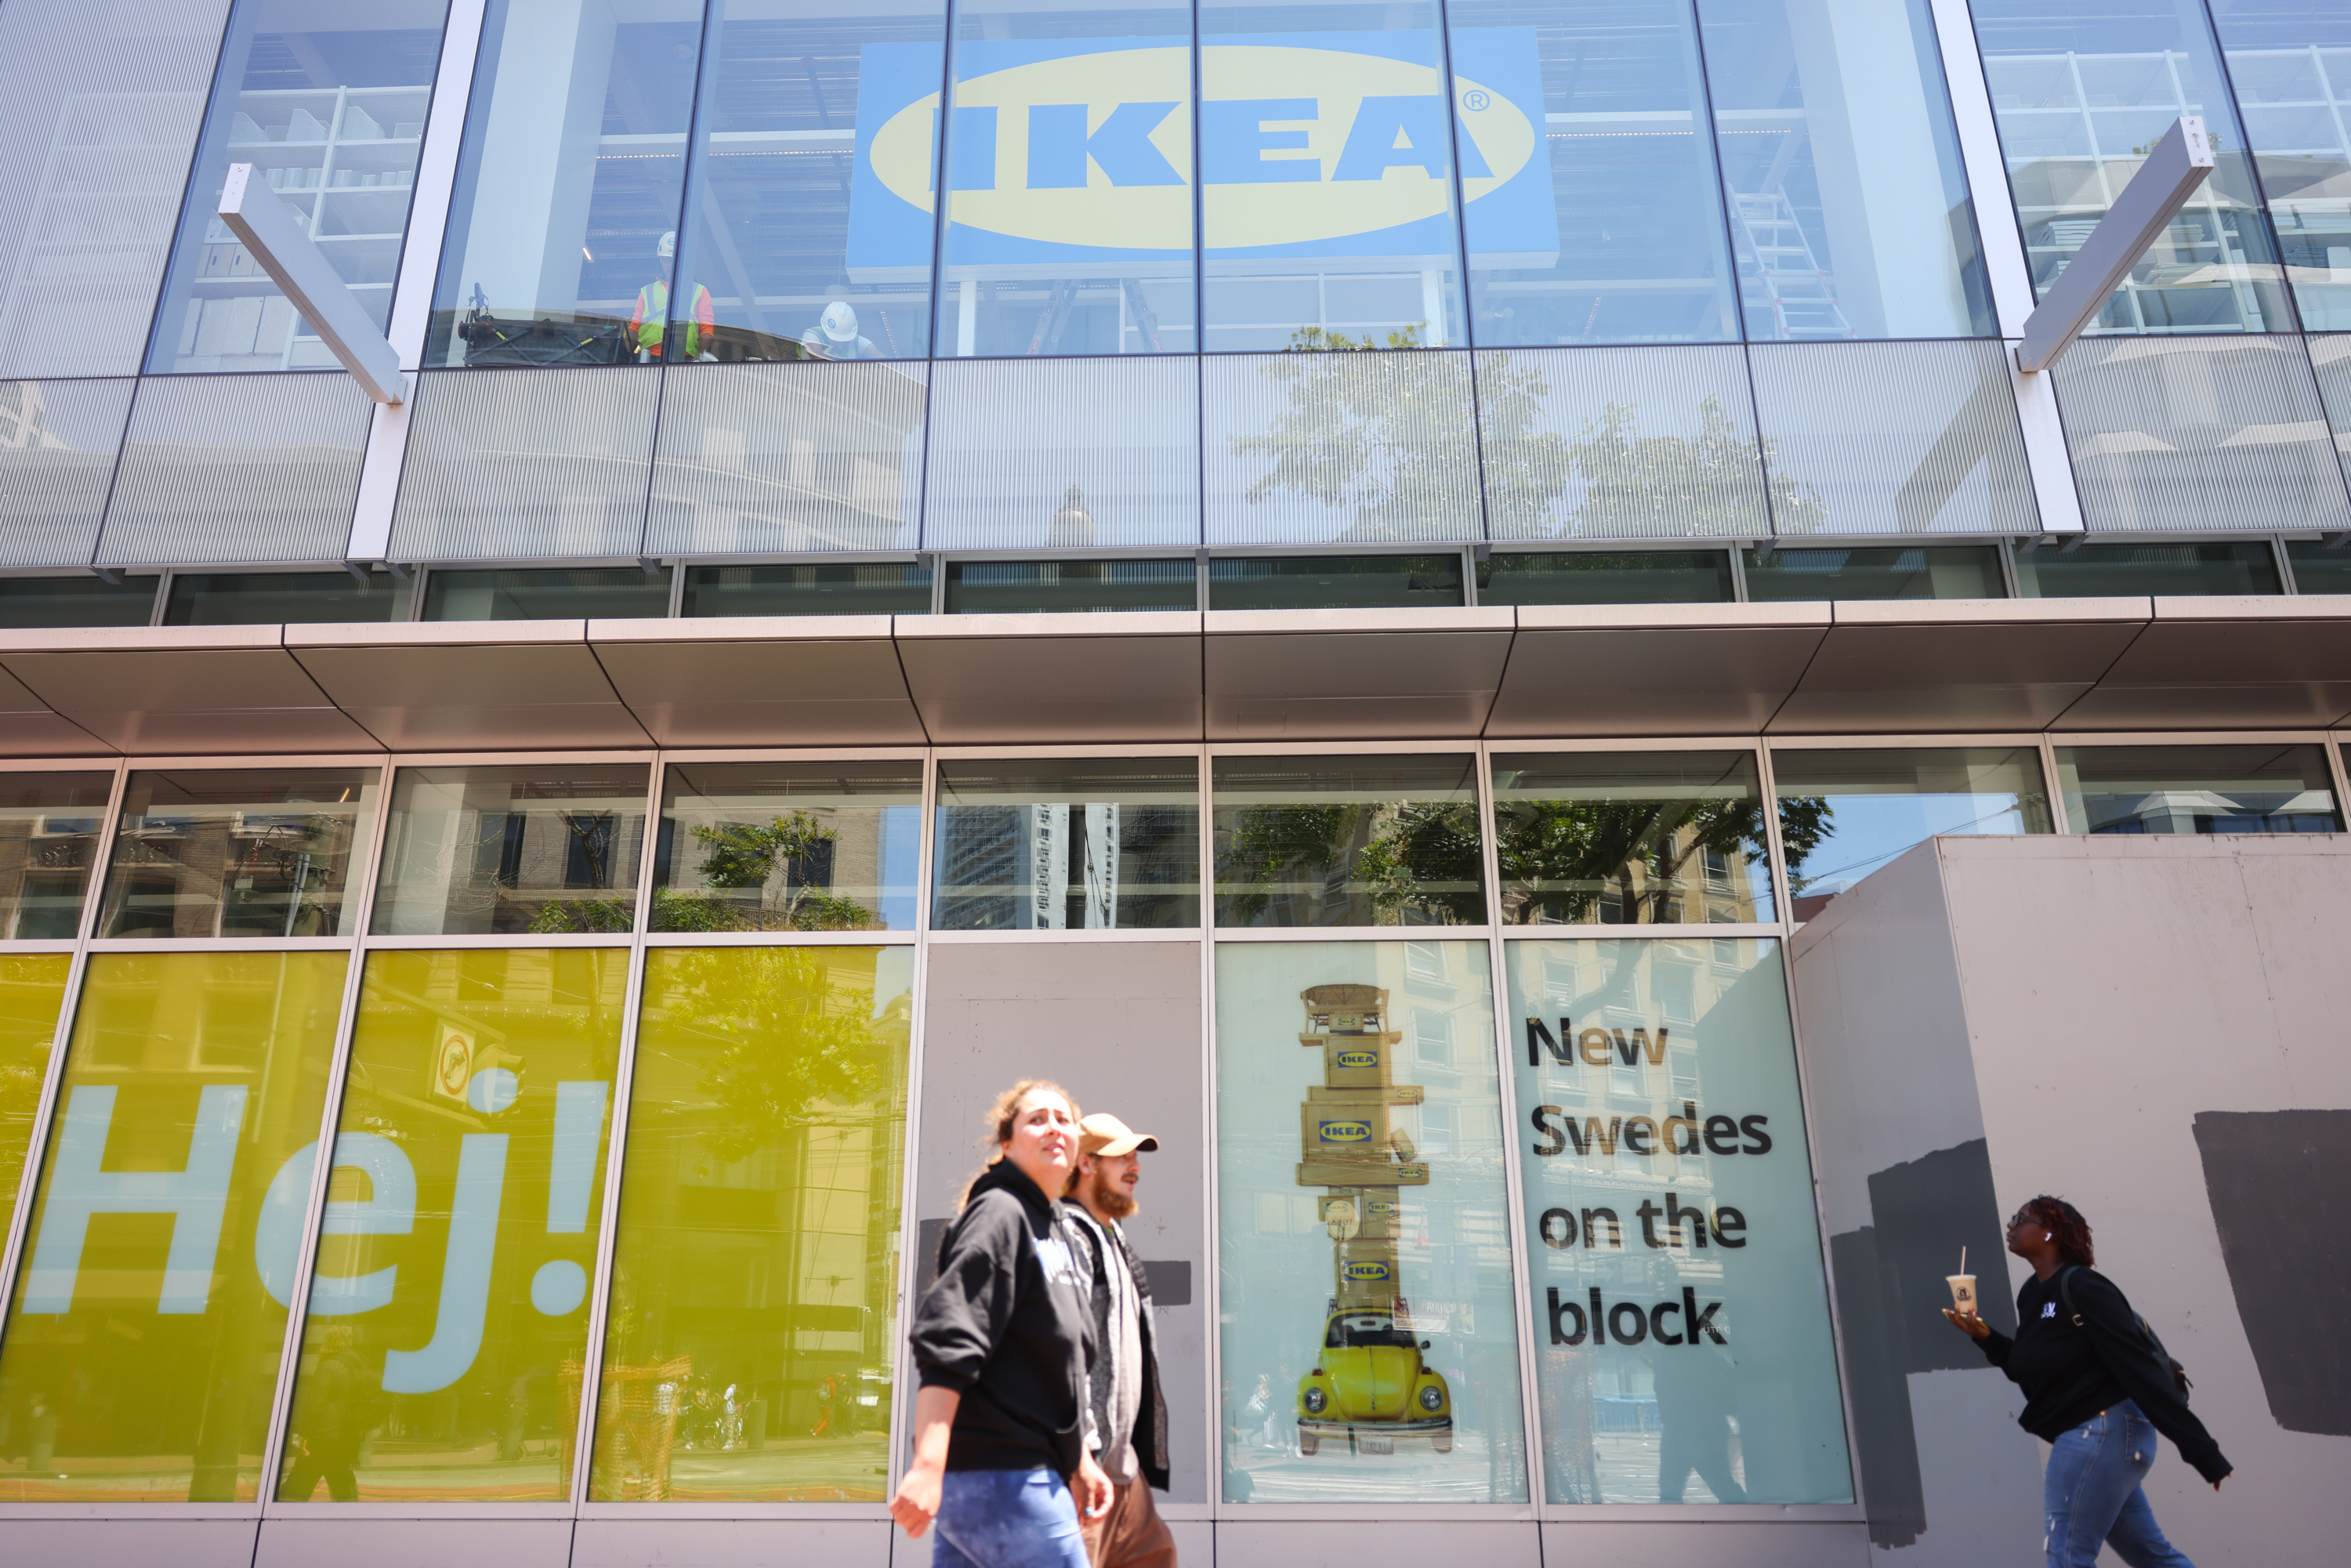 Two people walk by a glass-front IKEA store displaying the logo and quirky text "New Swedes on the block."